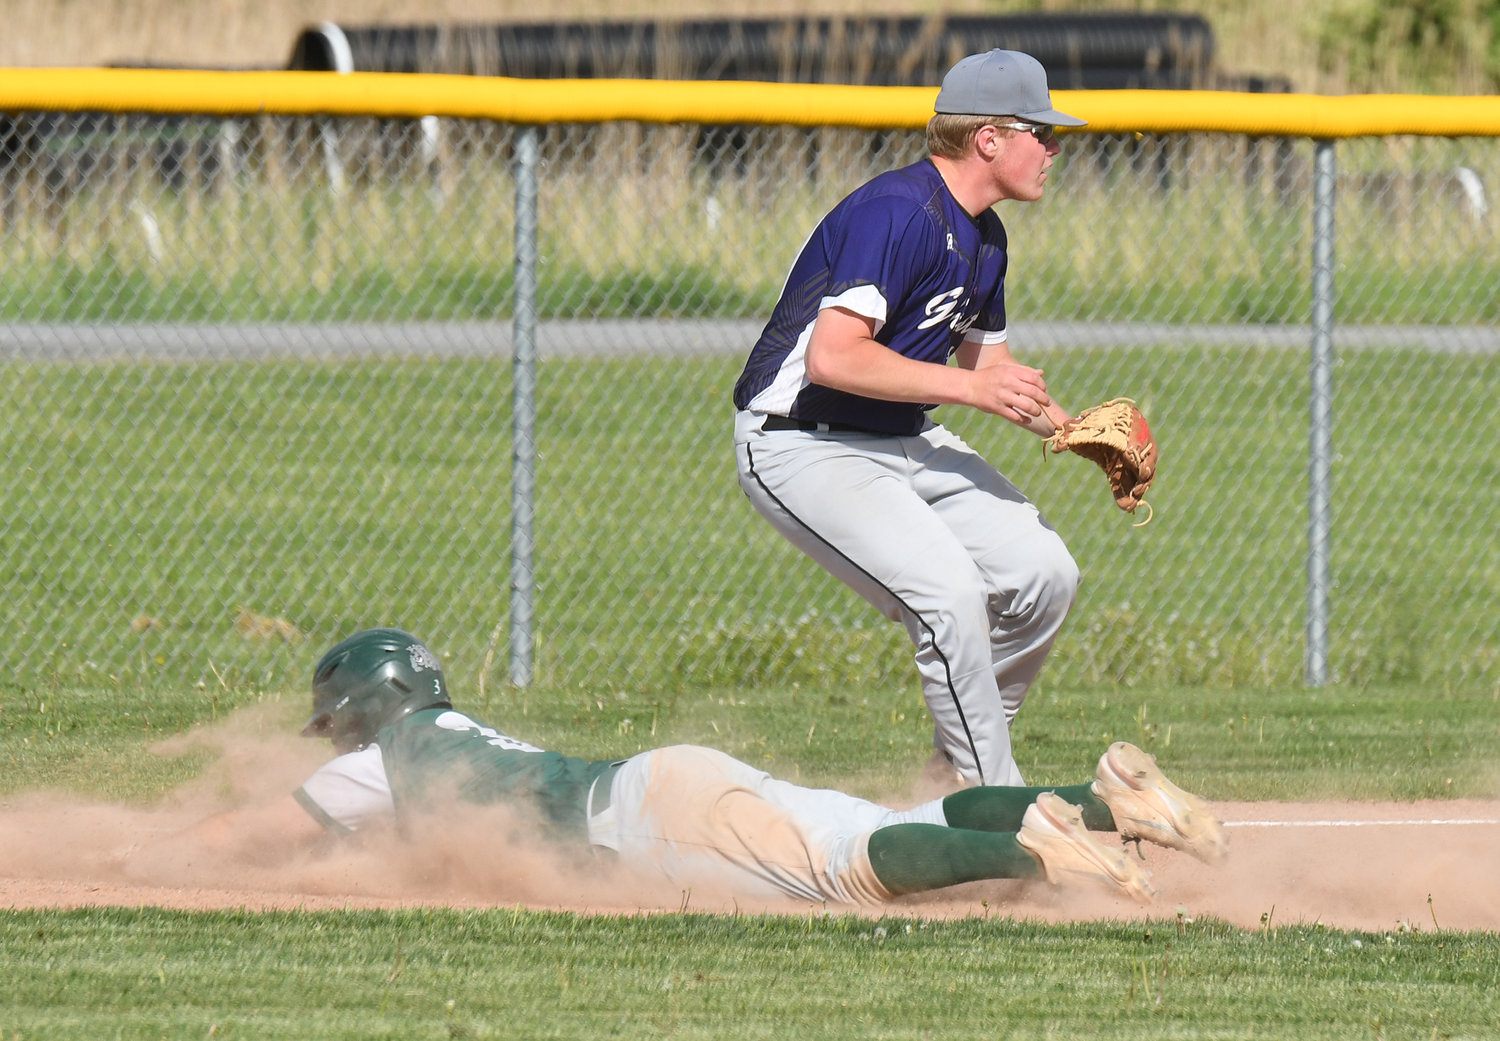 Westmoreland baserunner Joshua Suber slides head first into third base against Alexandria Tuesday. The Bulldogs won 18-1 to advance to the Section III Class C quarterfinals. Suber had a single, sacrifice fly, run scored and two RBIs.